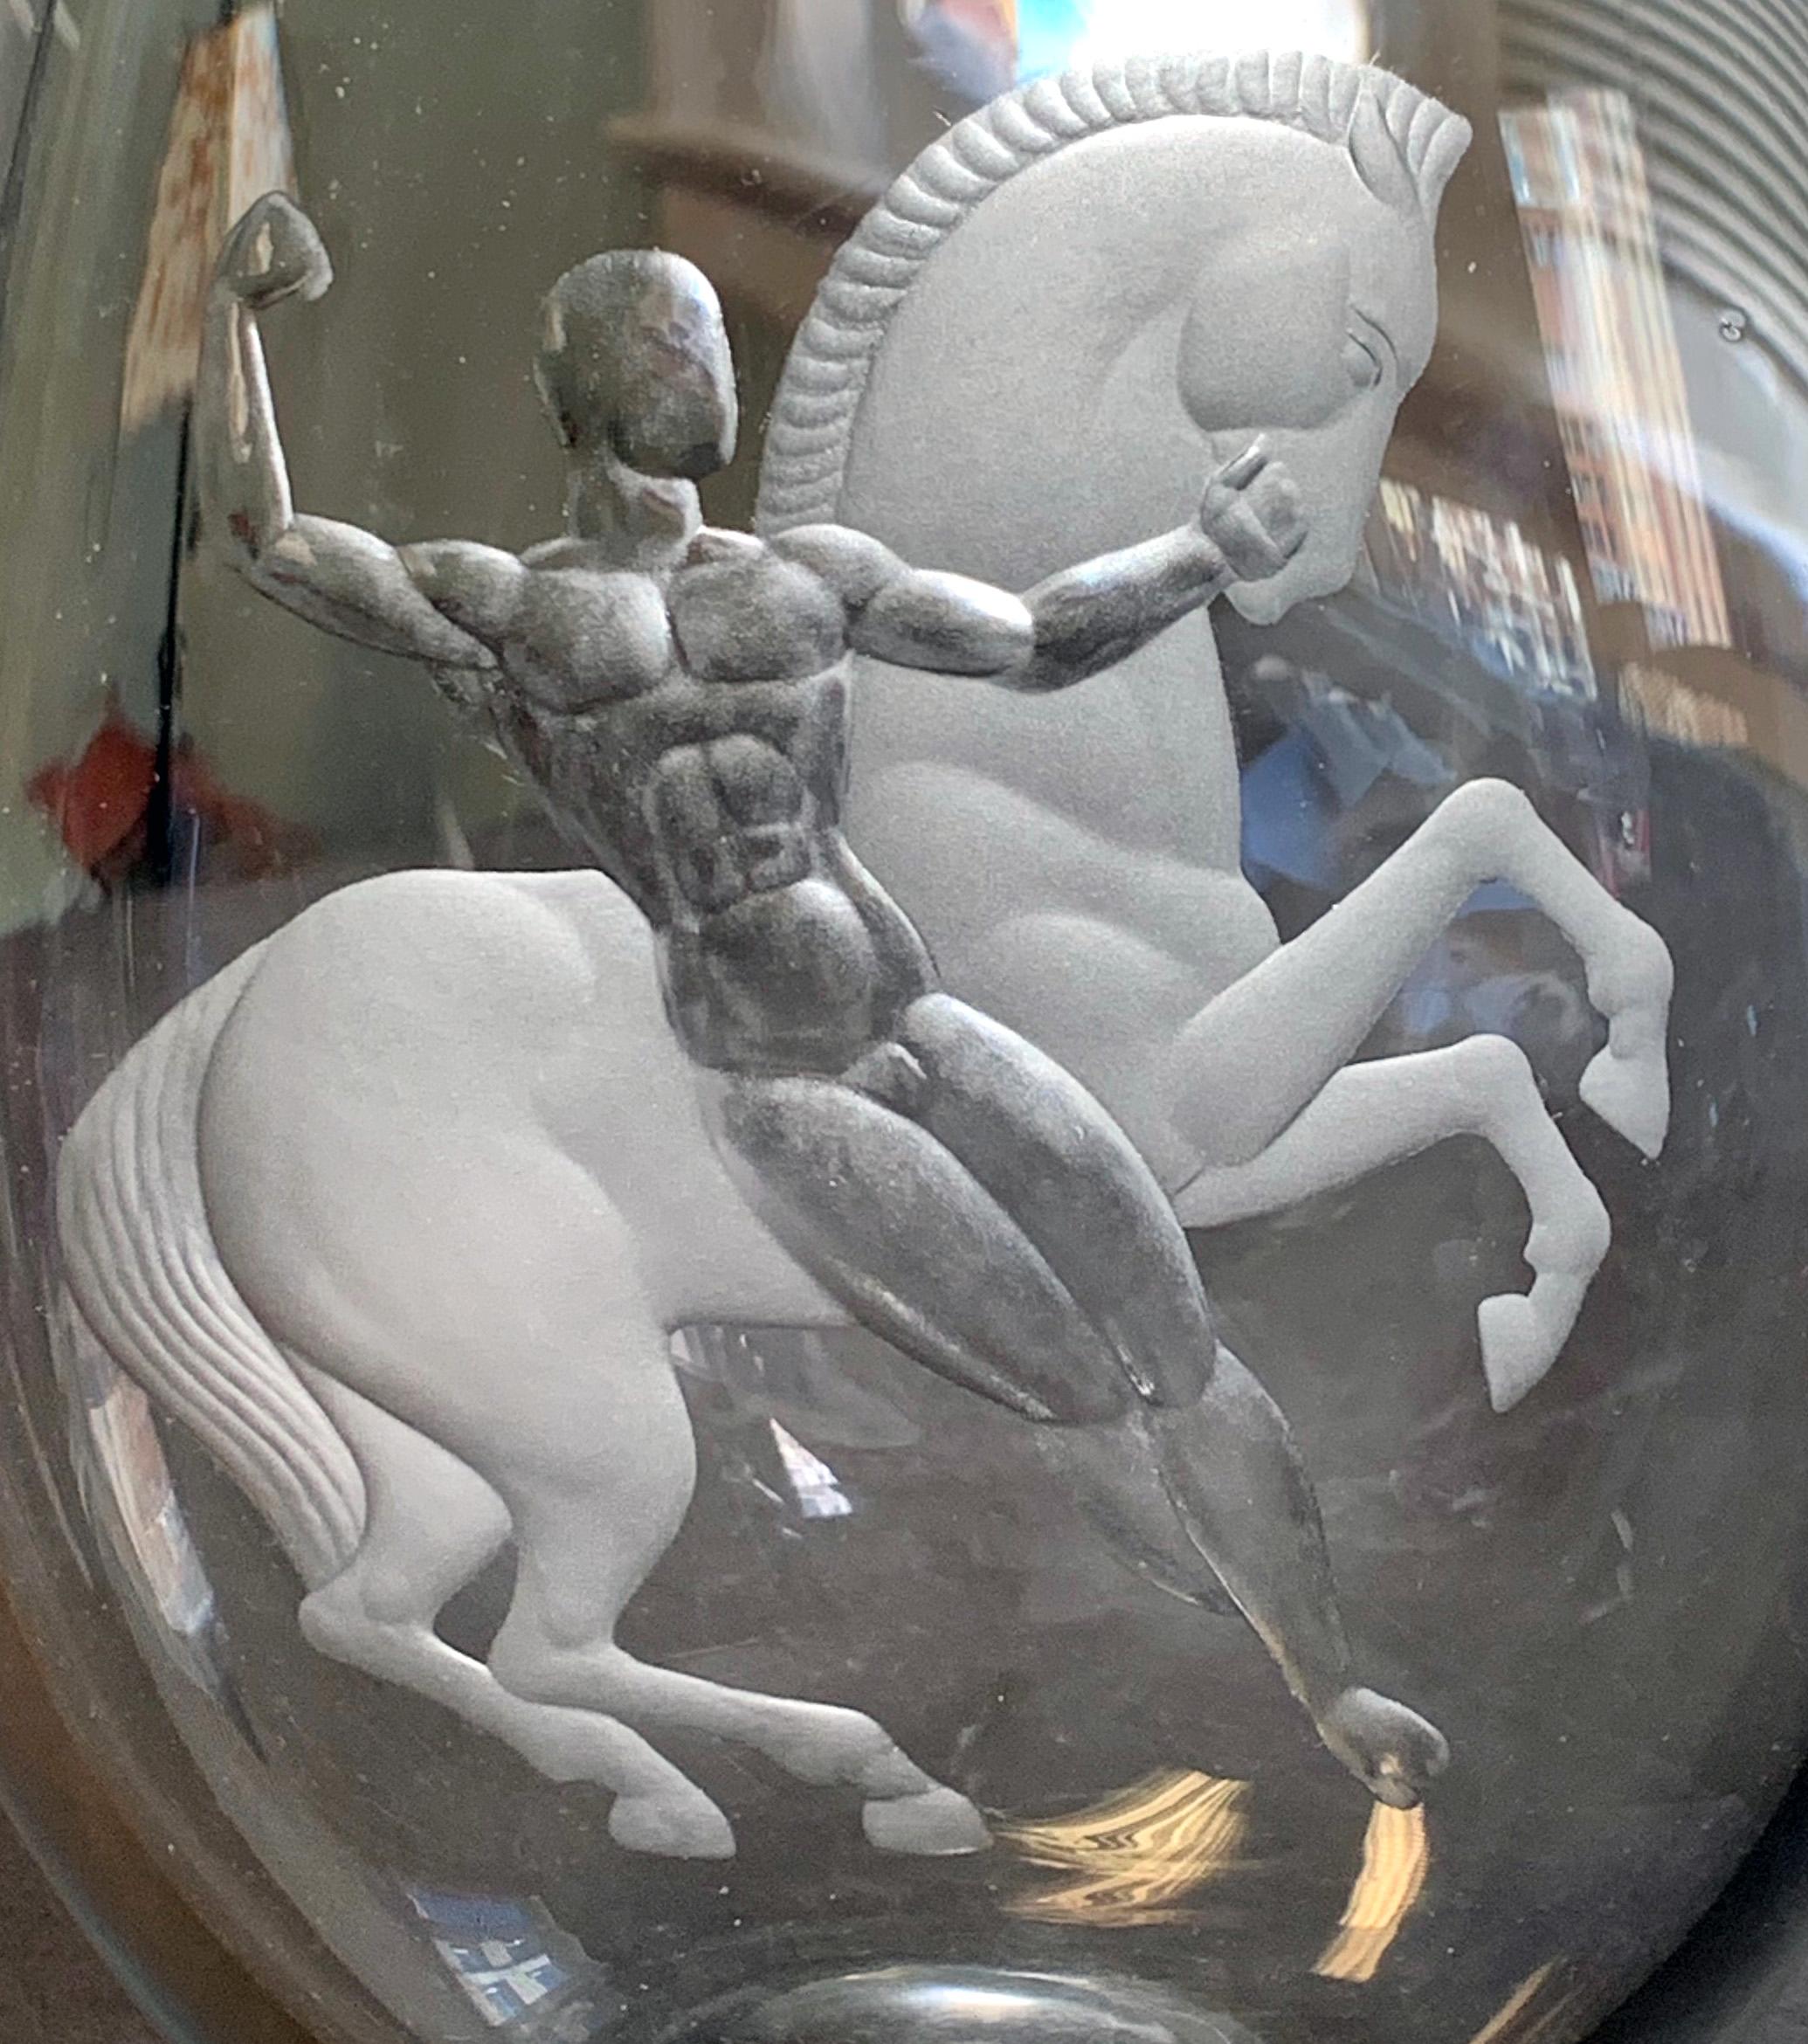 This rare and remarkable Art Deco vase -- created by one of the masters of engraved glass art in the 1930s -- depicts Bellerophon taming the wild, flying figure of Pegasus, having lassoed him after the creature paused for a drink. The artist is